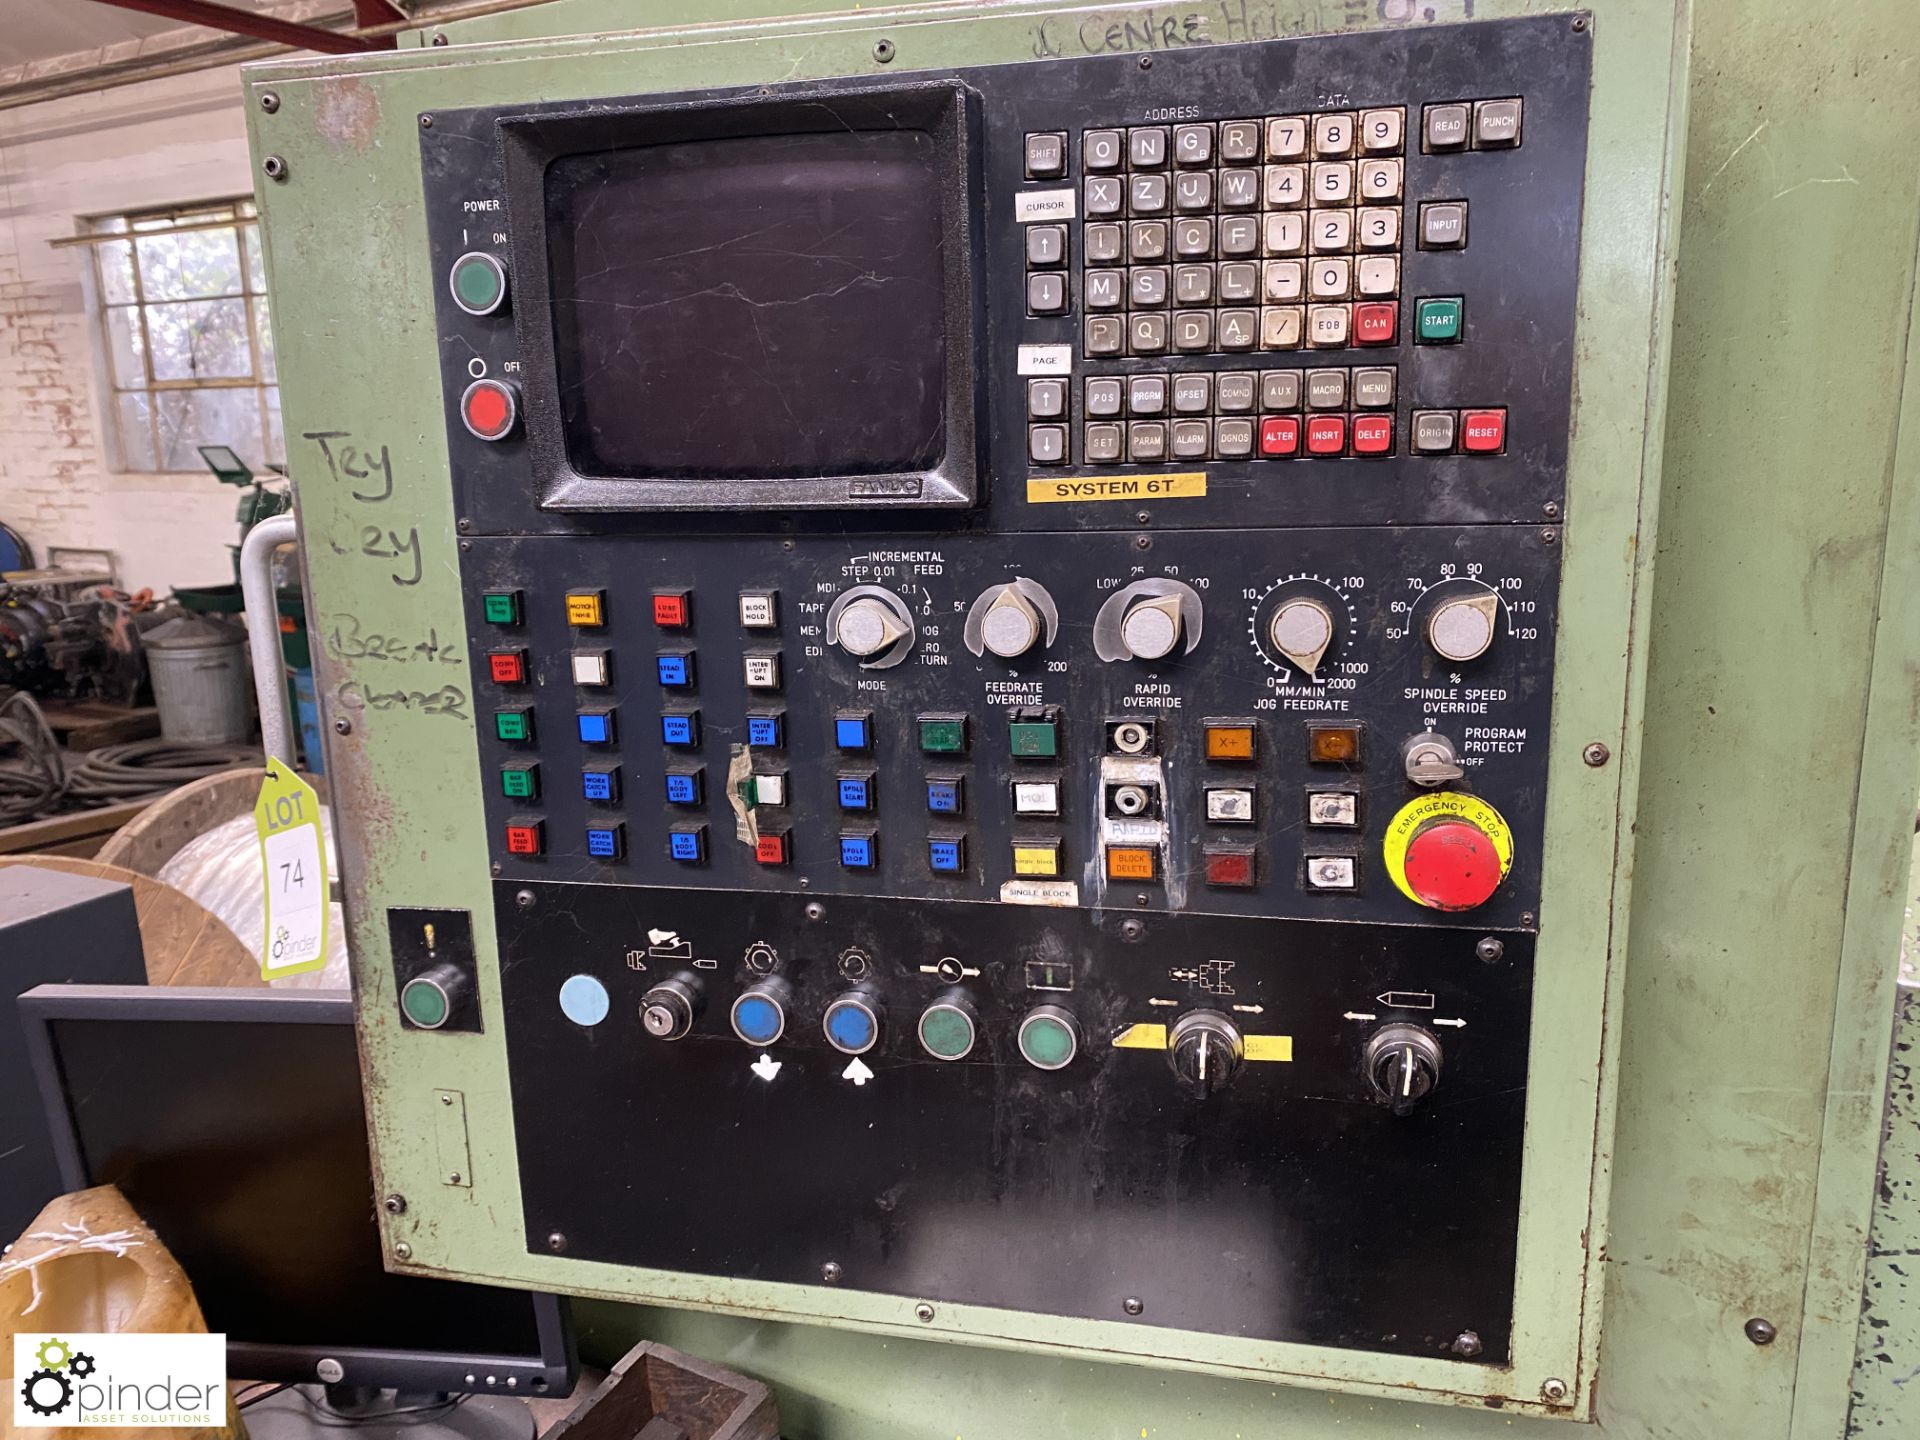 Churchill HC4/15 CNC slant bed Lathe, with Fanuc system 6T control, serial number 20187 and - Image 11 of 20